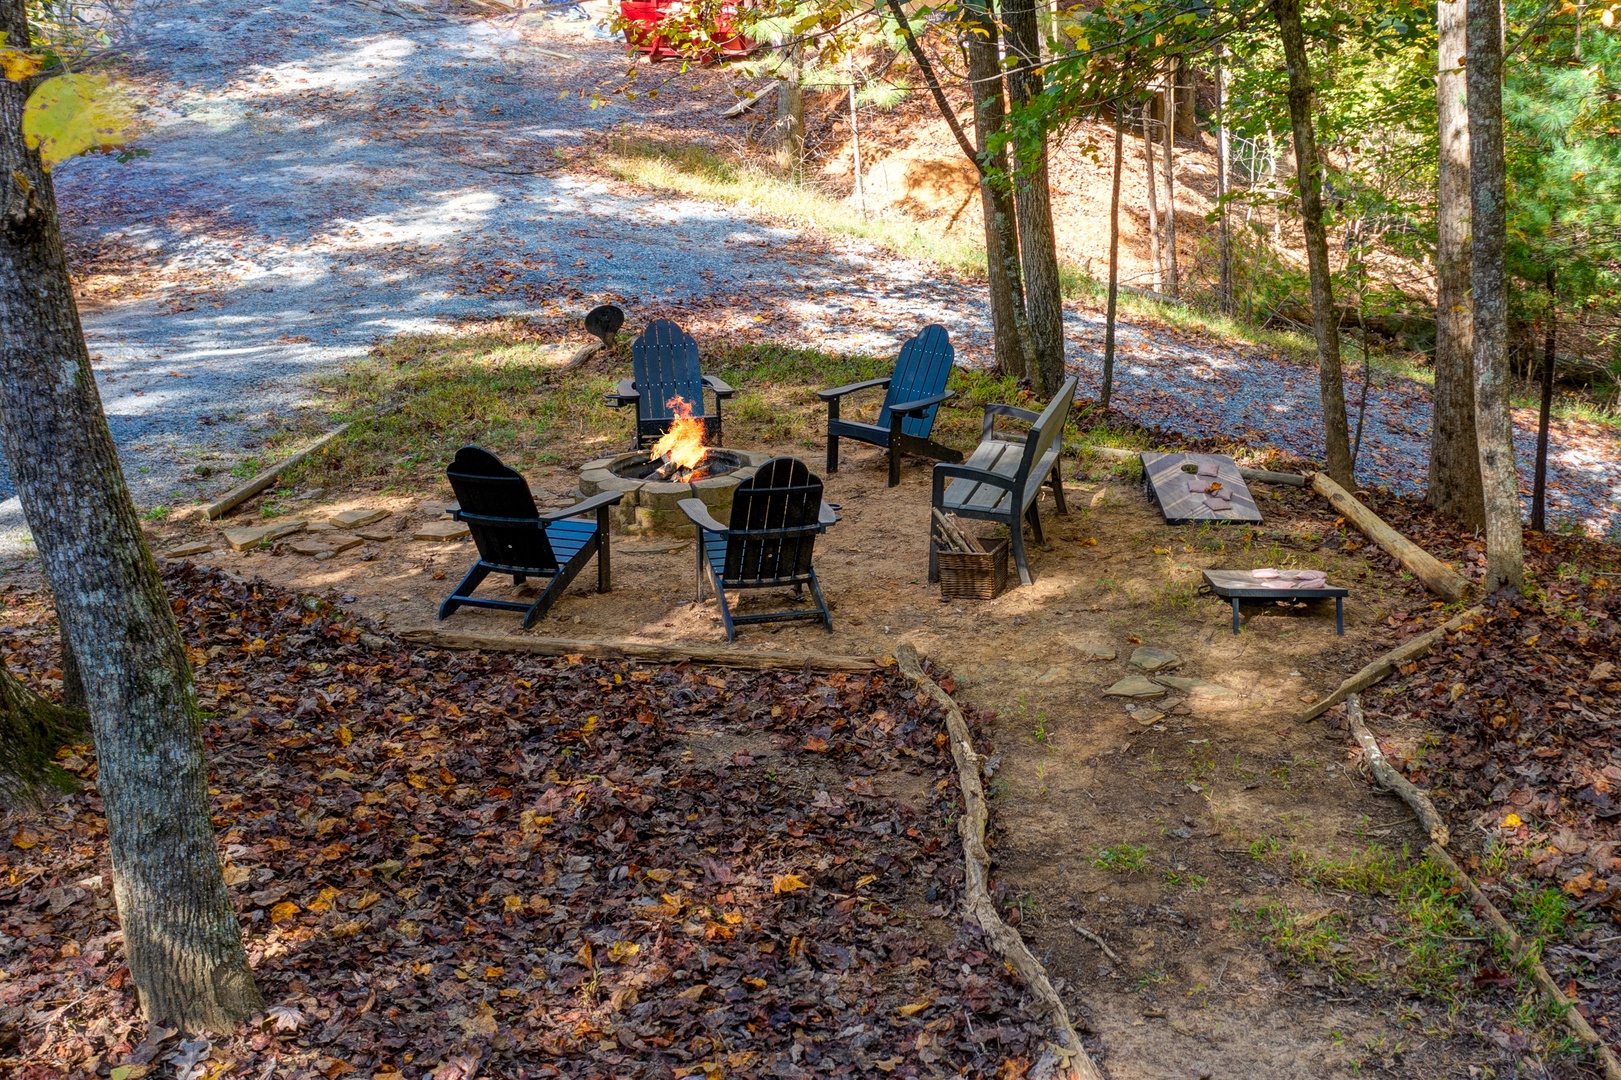 Head Down to the Outdoor Fire Pit to keep the conversations going throughout the night